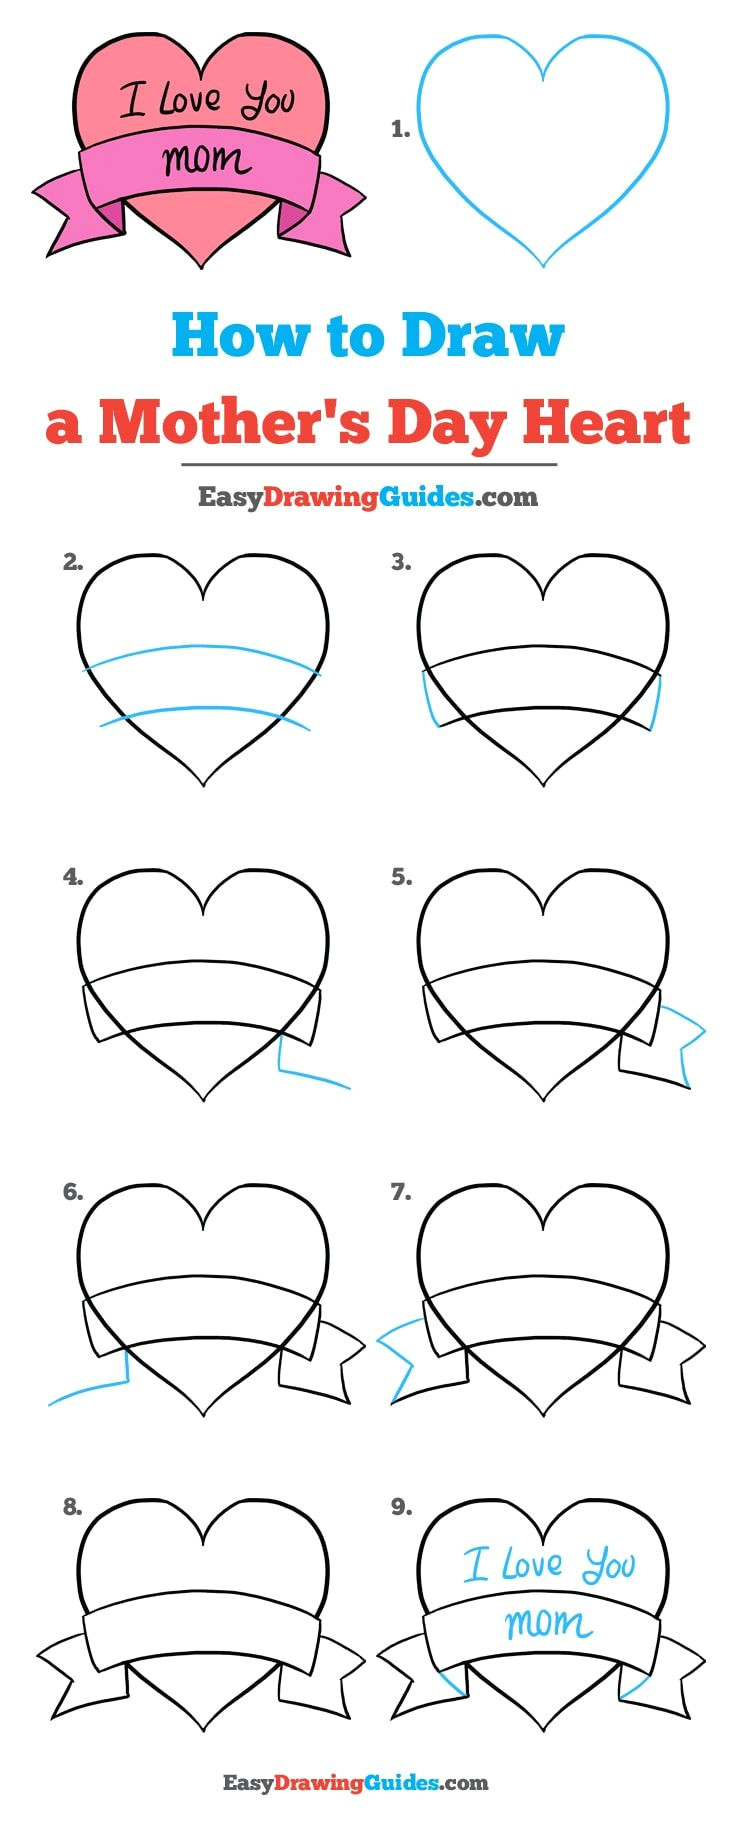 Fun 2 Draw Easy Drawings How to Draw A Mother S Day Heart Really Easy Drawing Tutorial